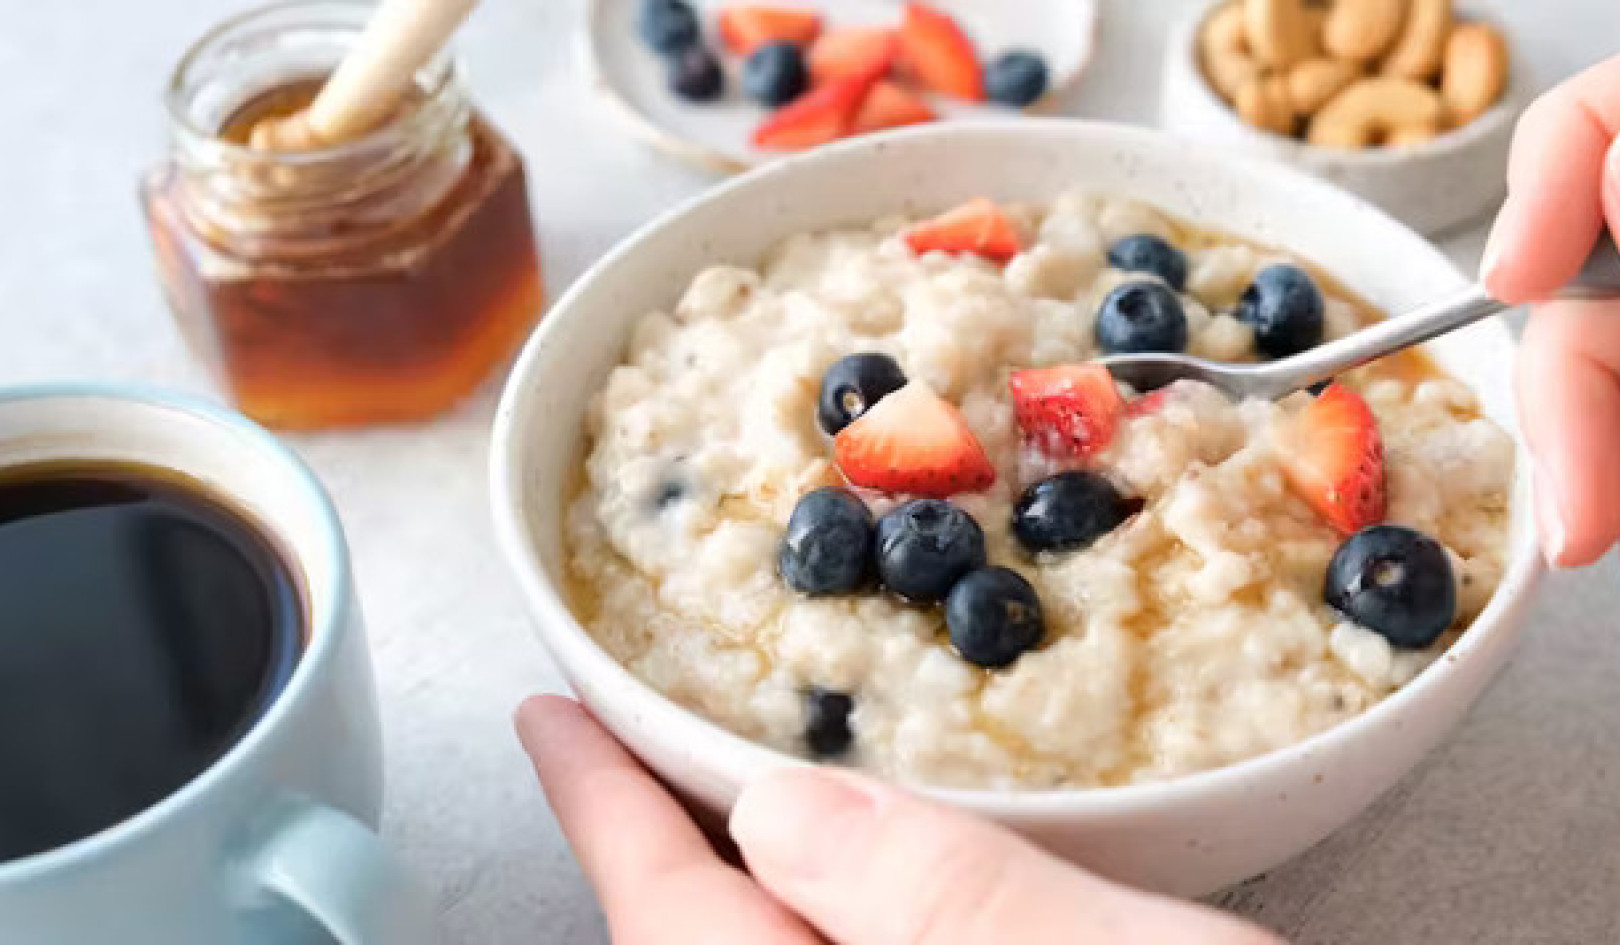 Oats: The Superfood You Might Be Underestimating